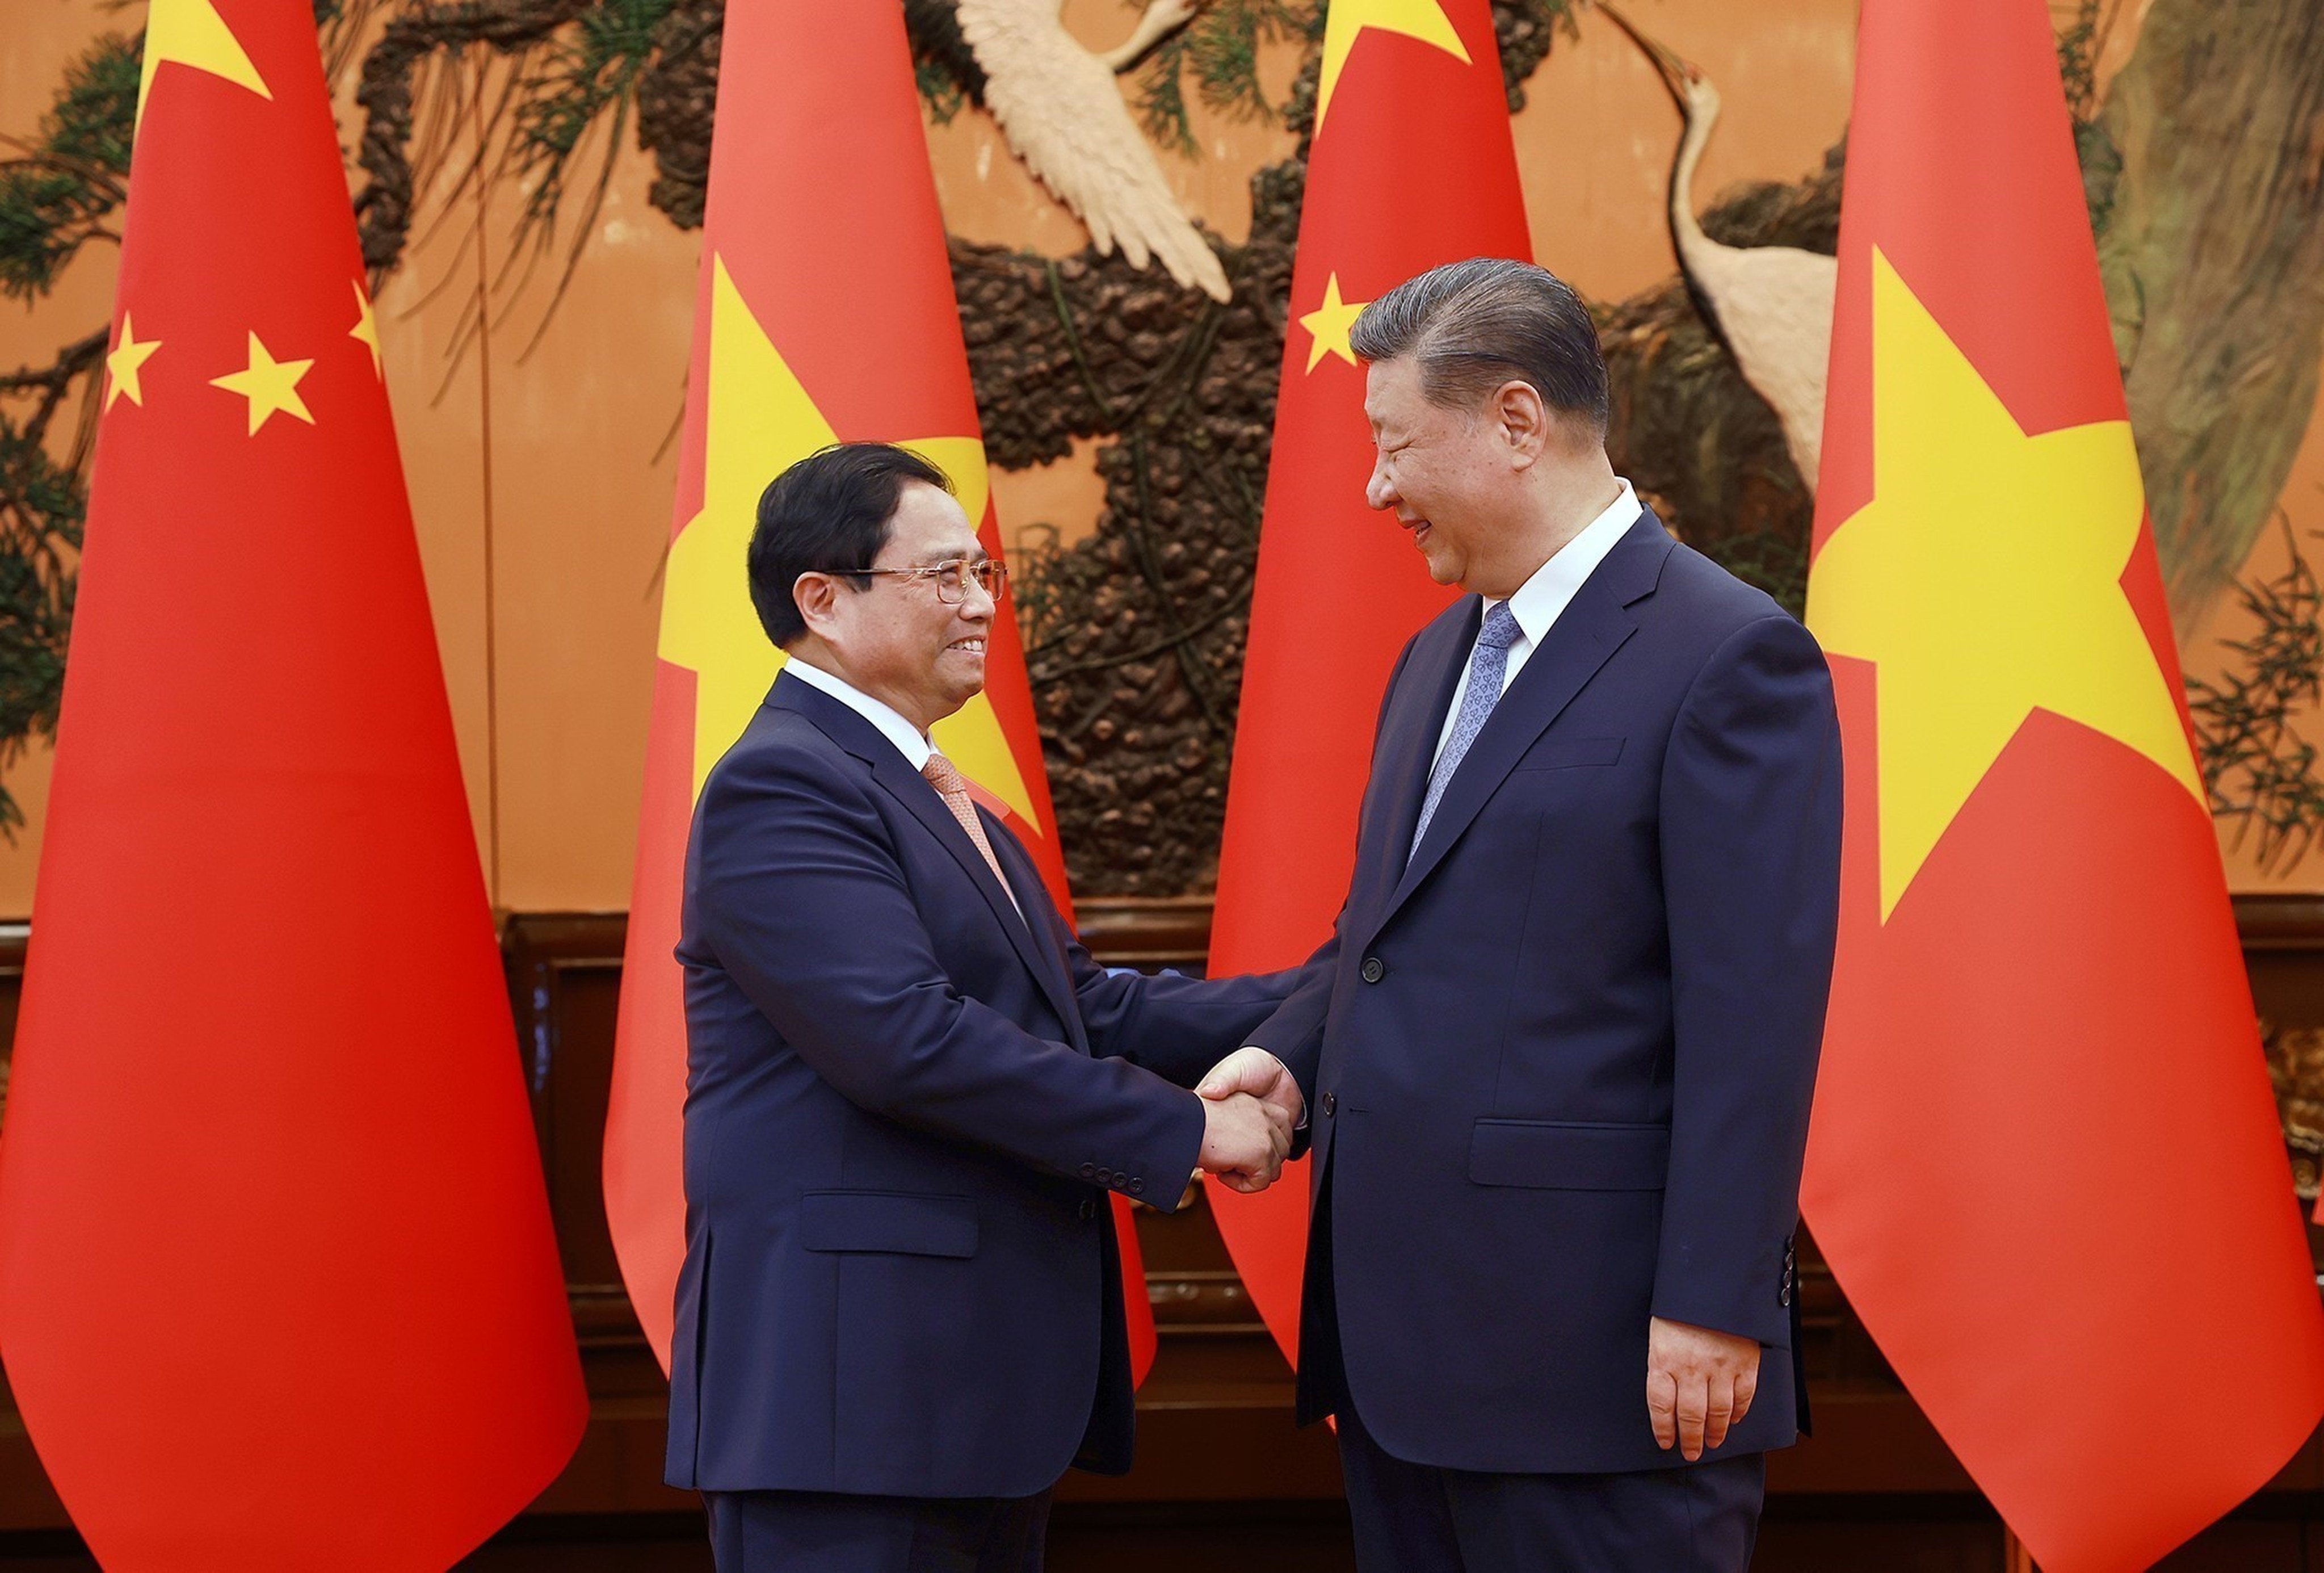 Vietnamese Prime Minister Pham Minh Chinh (left) with Chinese President Xi Jinping at the Great Hall of the People in Beijing on Wednesday. Photo: Handout